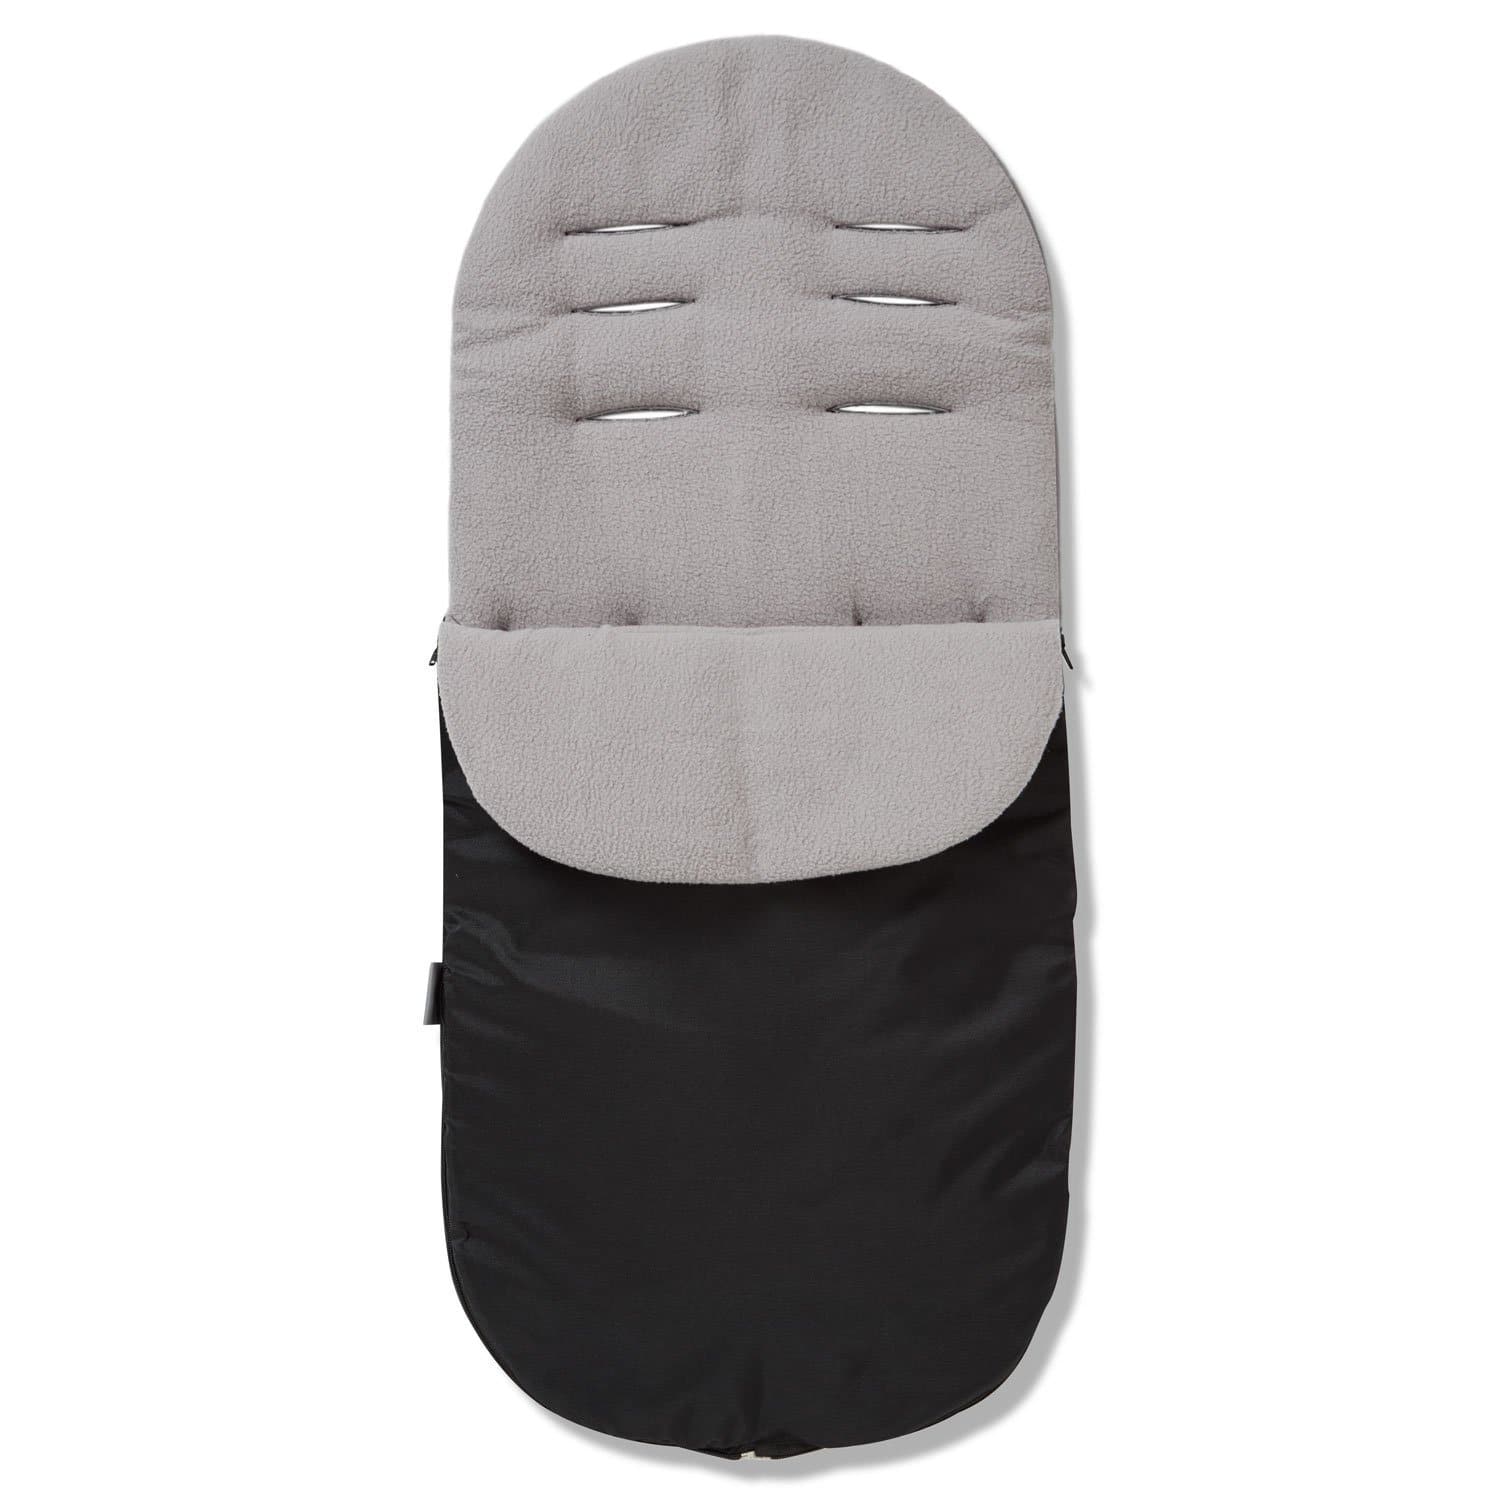 Footmuff / Cosy Toes Compatible with Diono - Grey / Fits All Models | For Your Little One